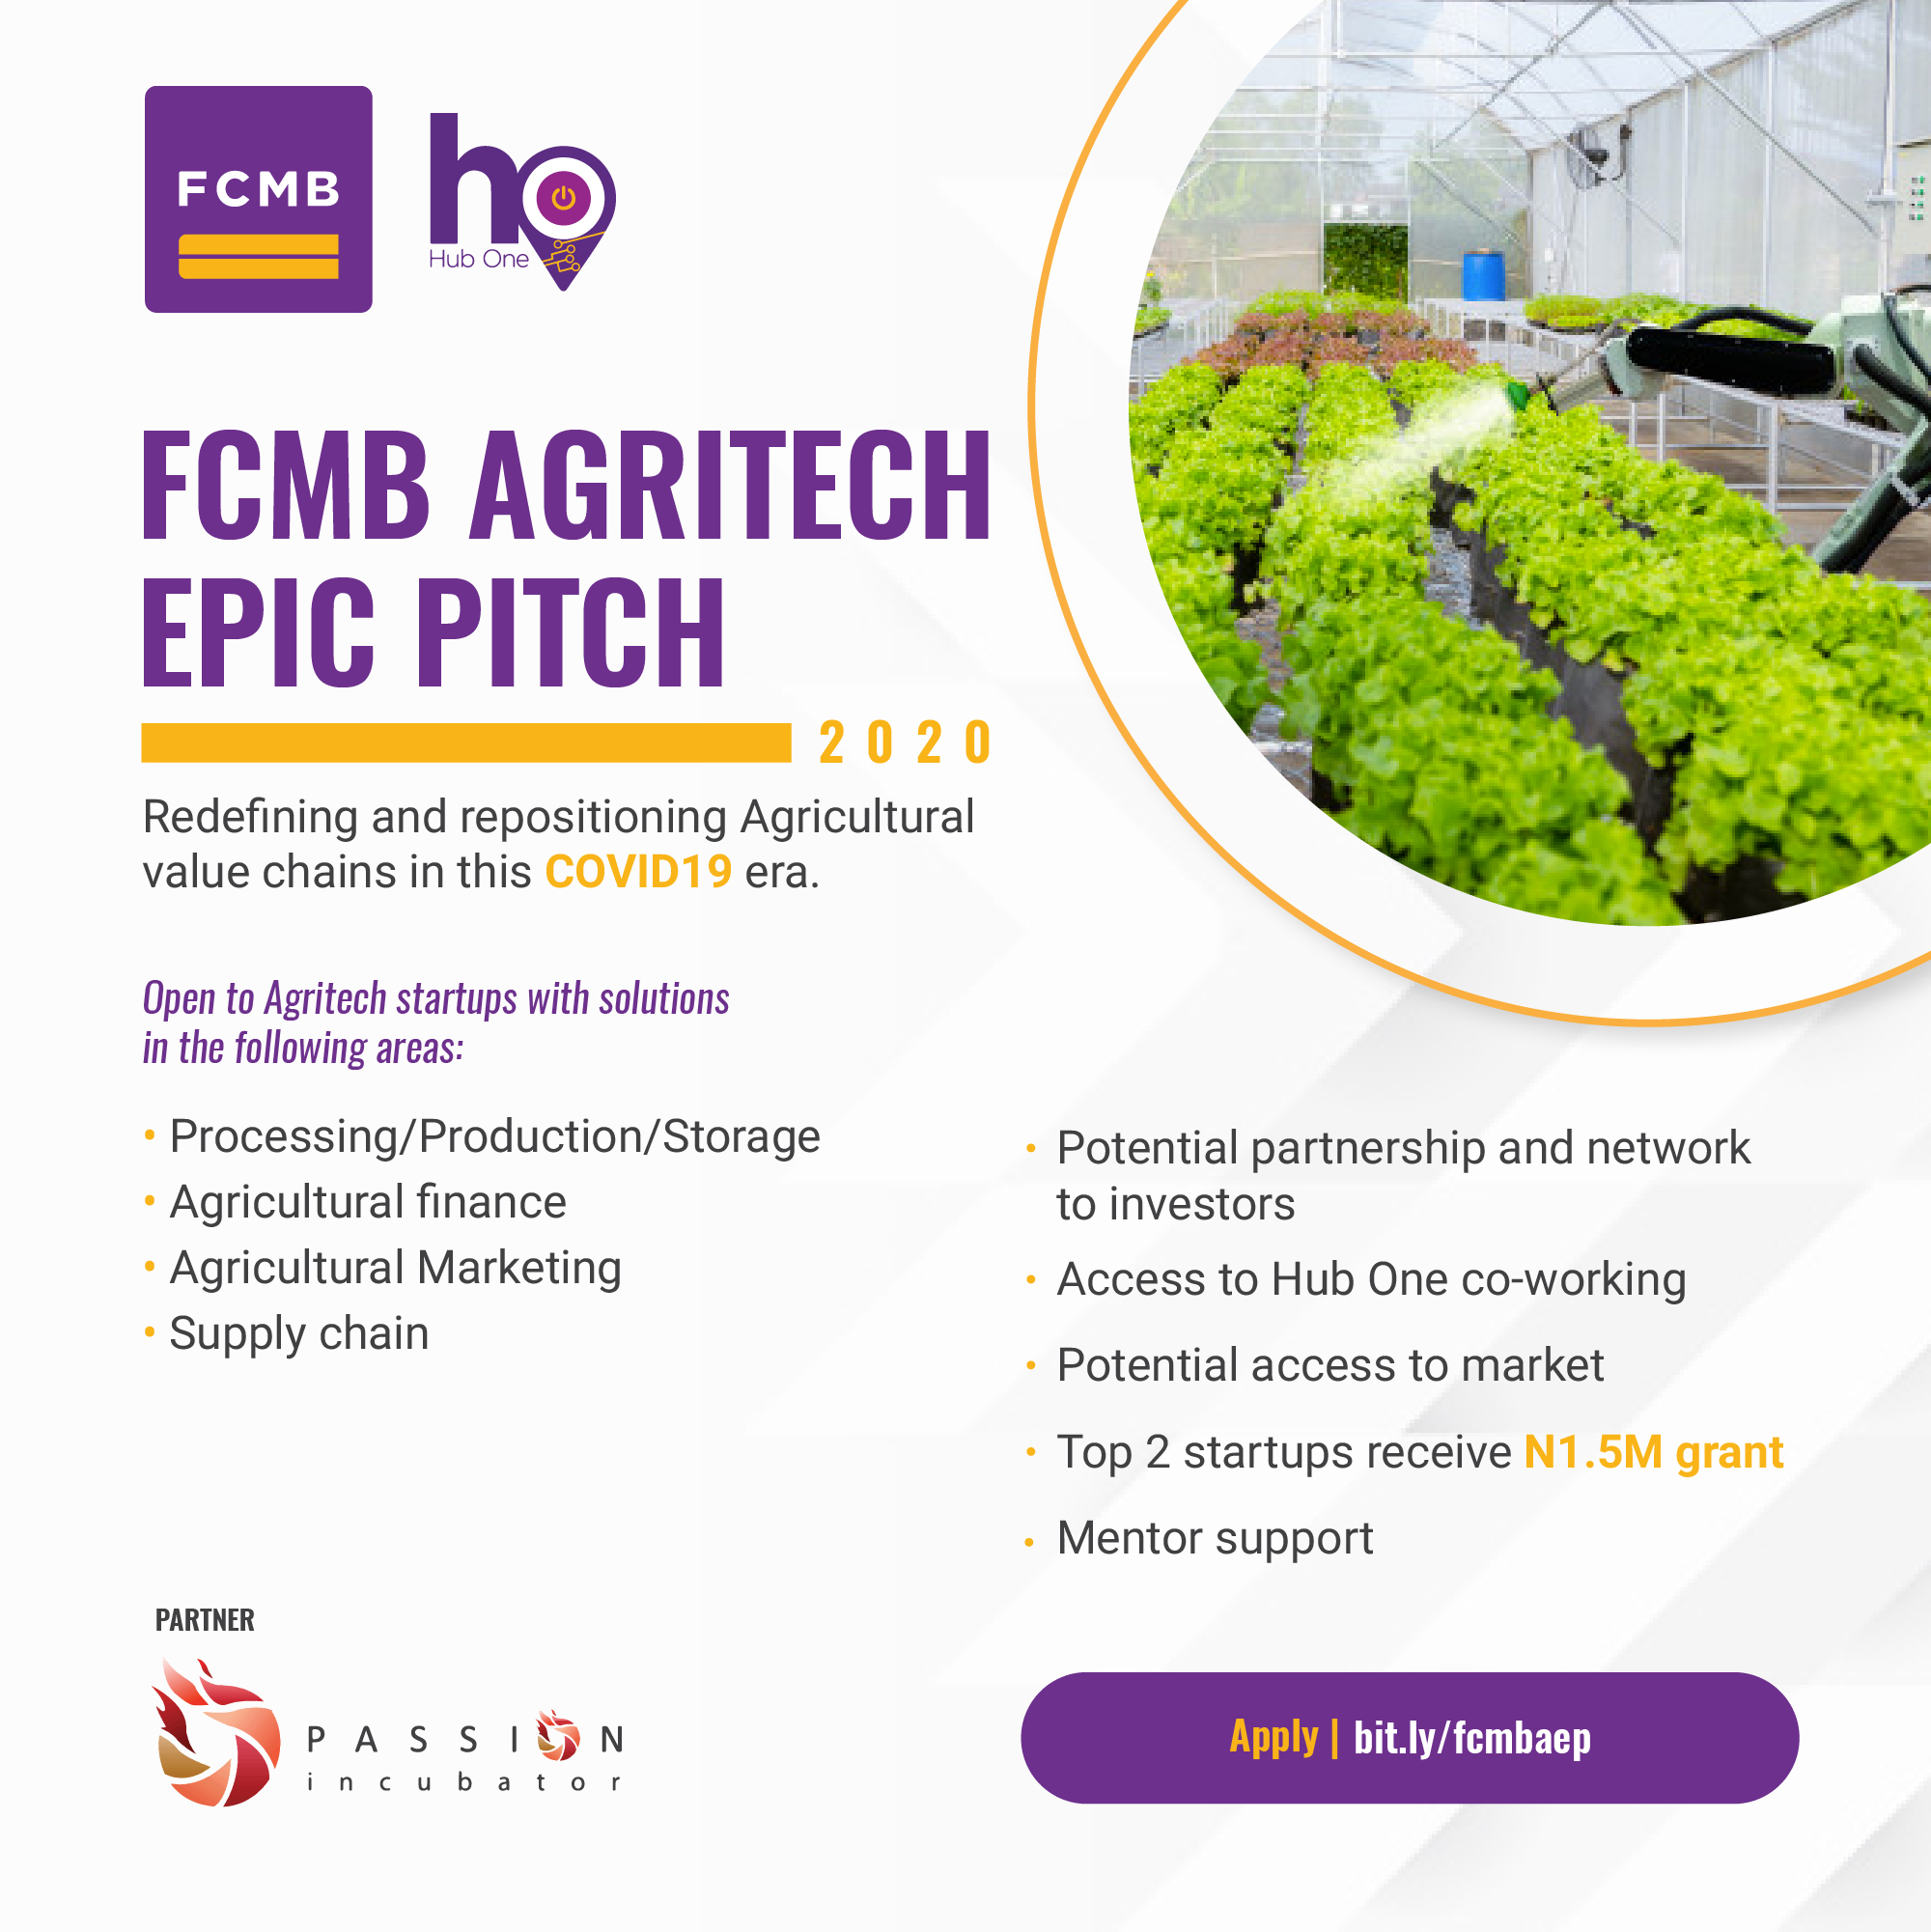 FCMB partners Passion Incubator to launch the FCMB Agritech EPIC Pitch 2020